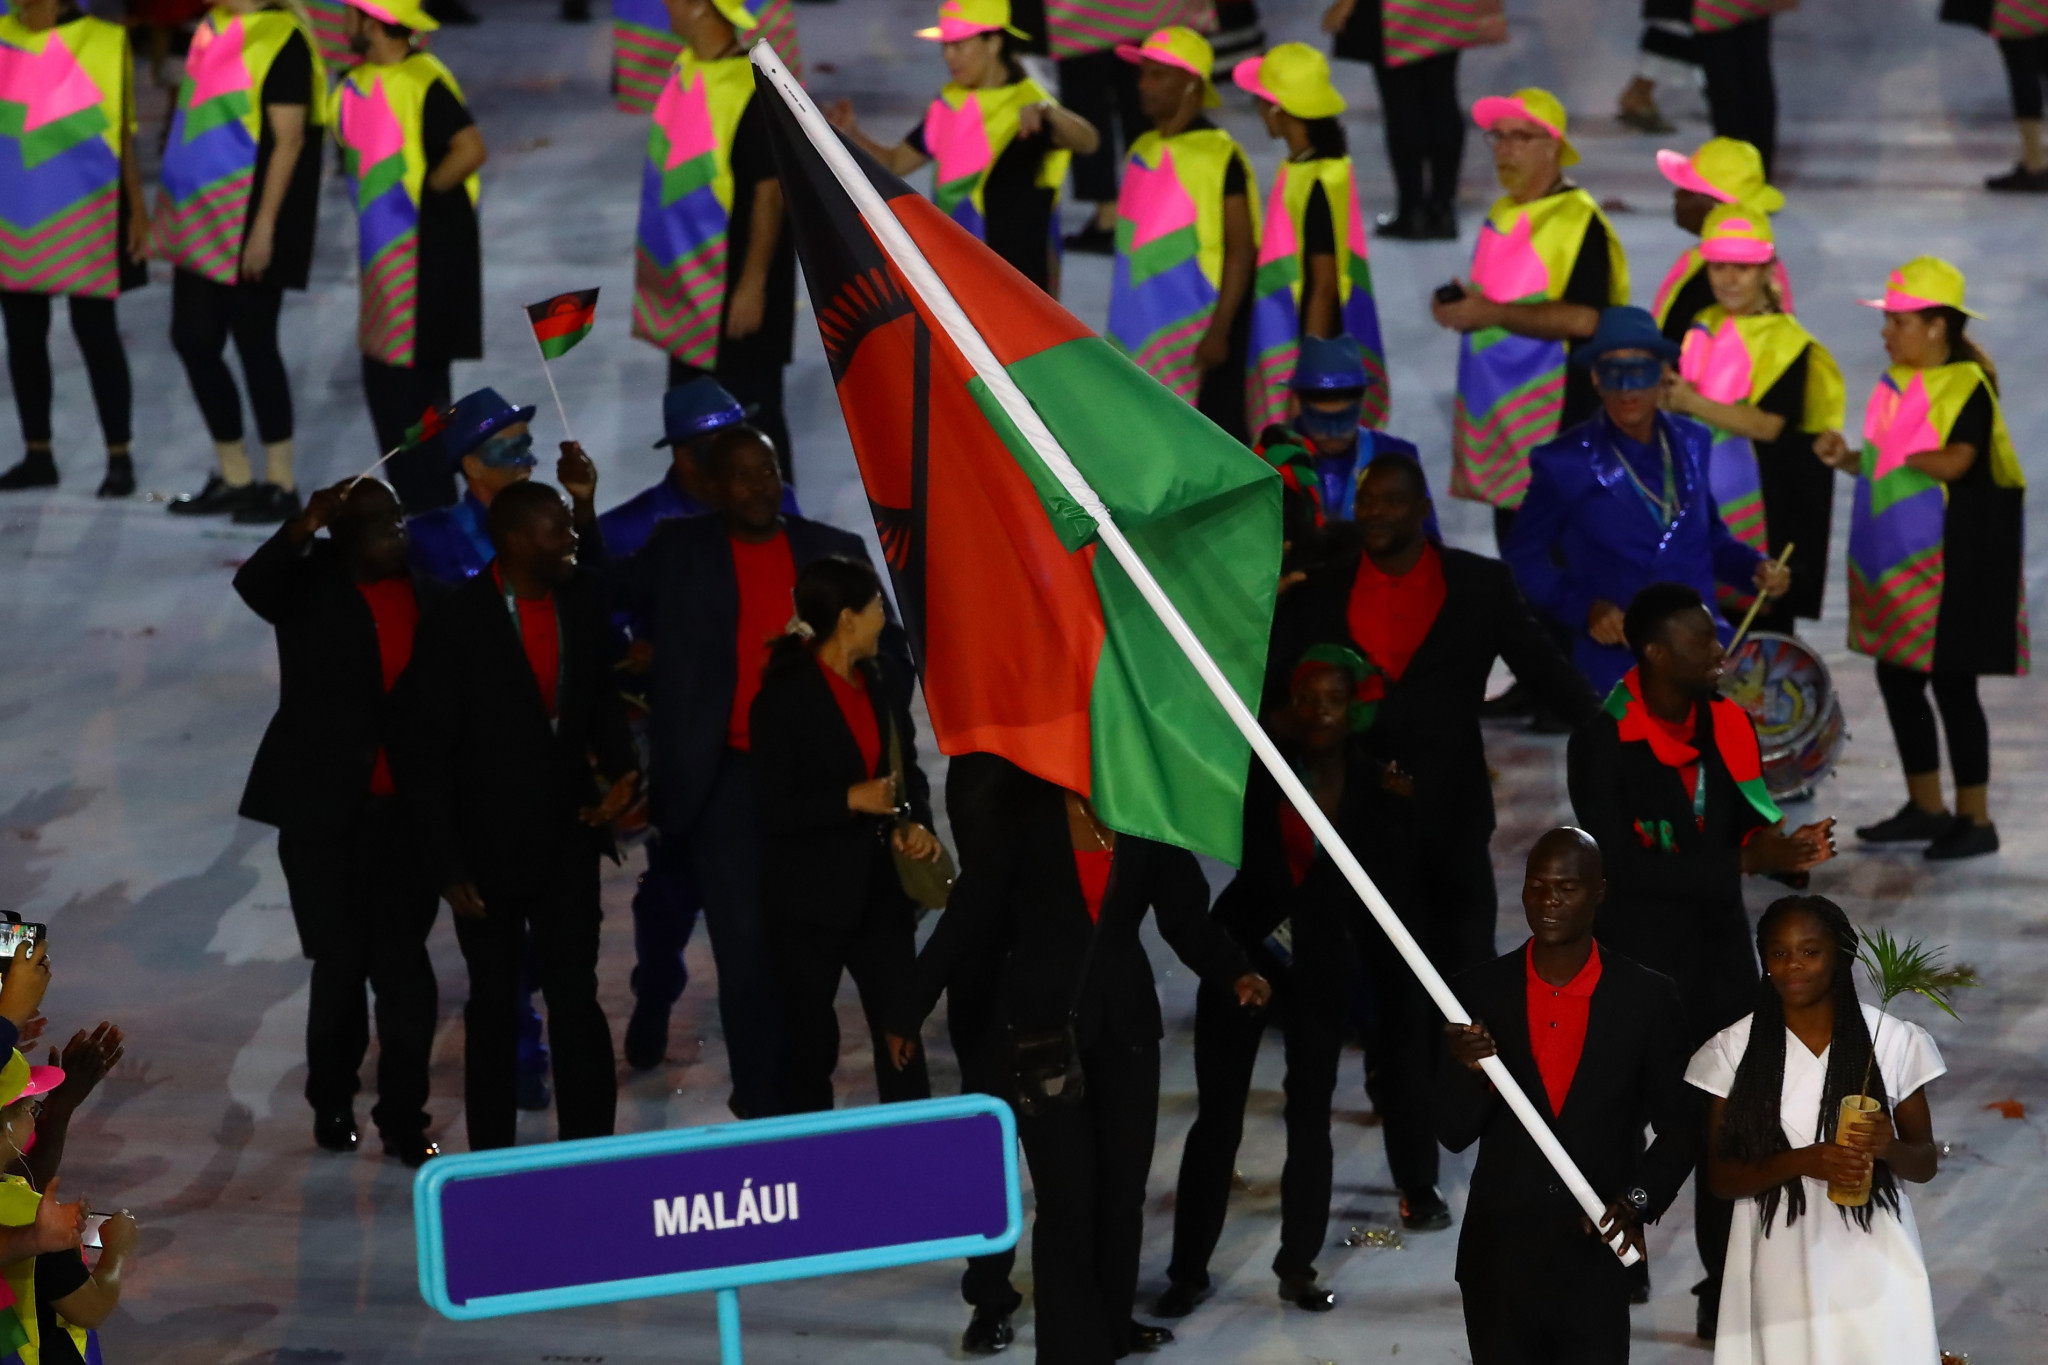 Malawi is one of the territories to benefit from free-to-air broadcasts, and research will be undertaken there to understand the impact of the coverage and inform the IPC's approach for Paris 2024 ©Getty Images